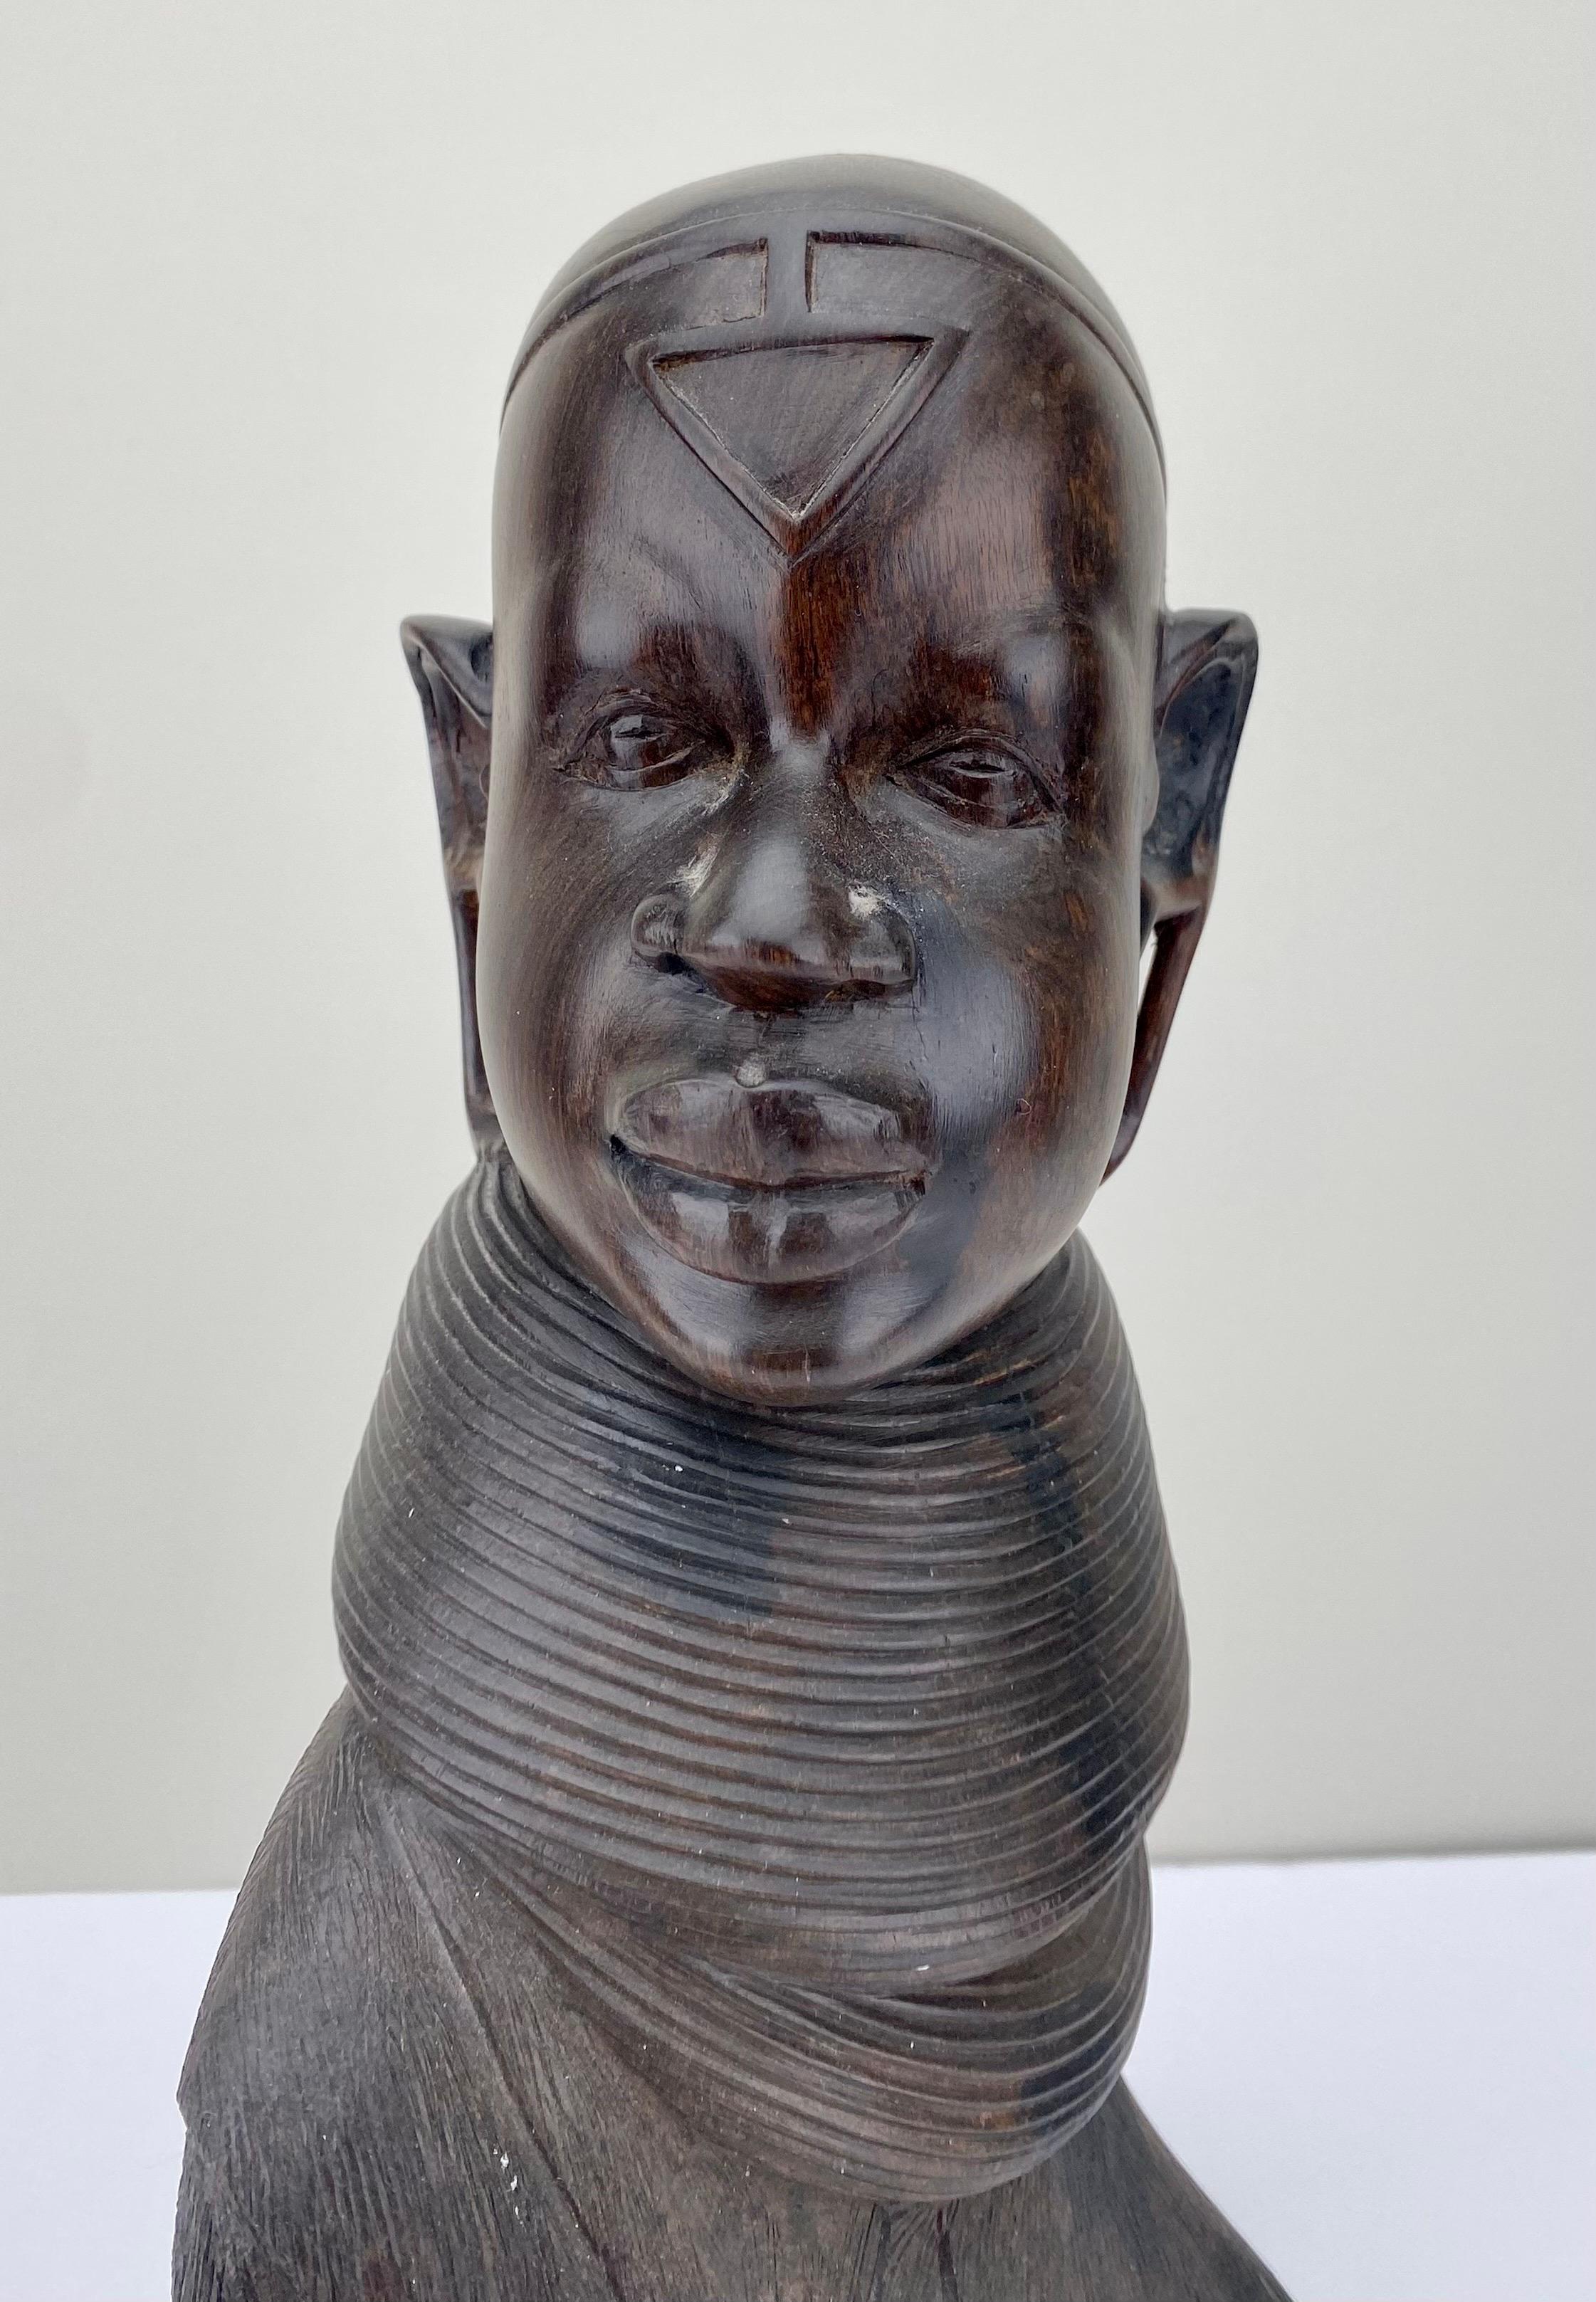  An African woman bust sculpture, meticulously hand-carved from the lustrous depths of ebony wood. This masterful creation pays homage to the rich heritage of African craftsmanship. 
The sculpture delicately unveils the intricate details of African